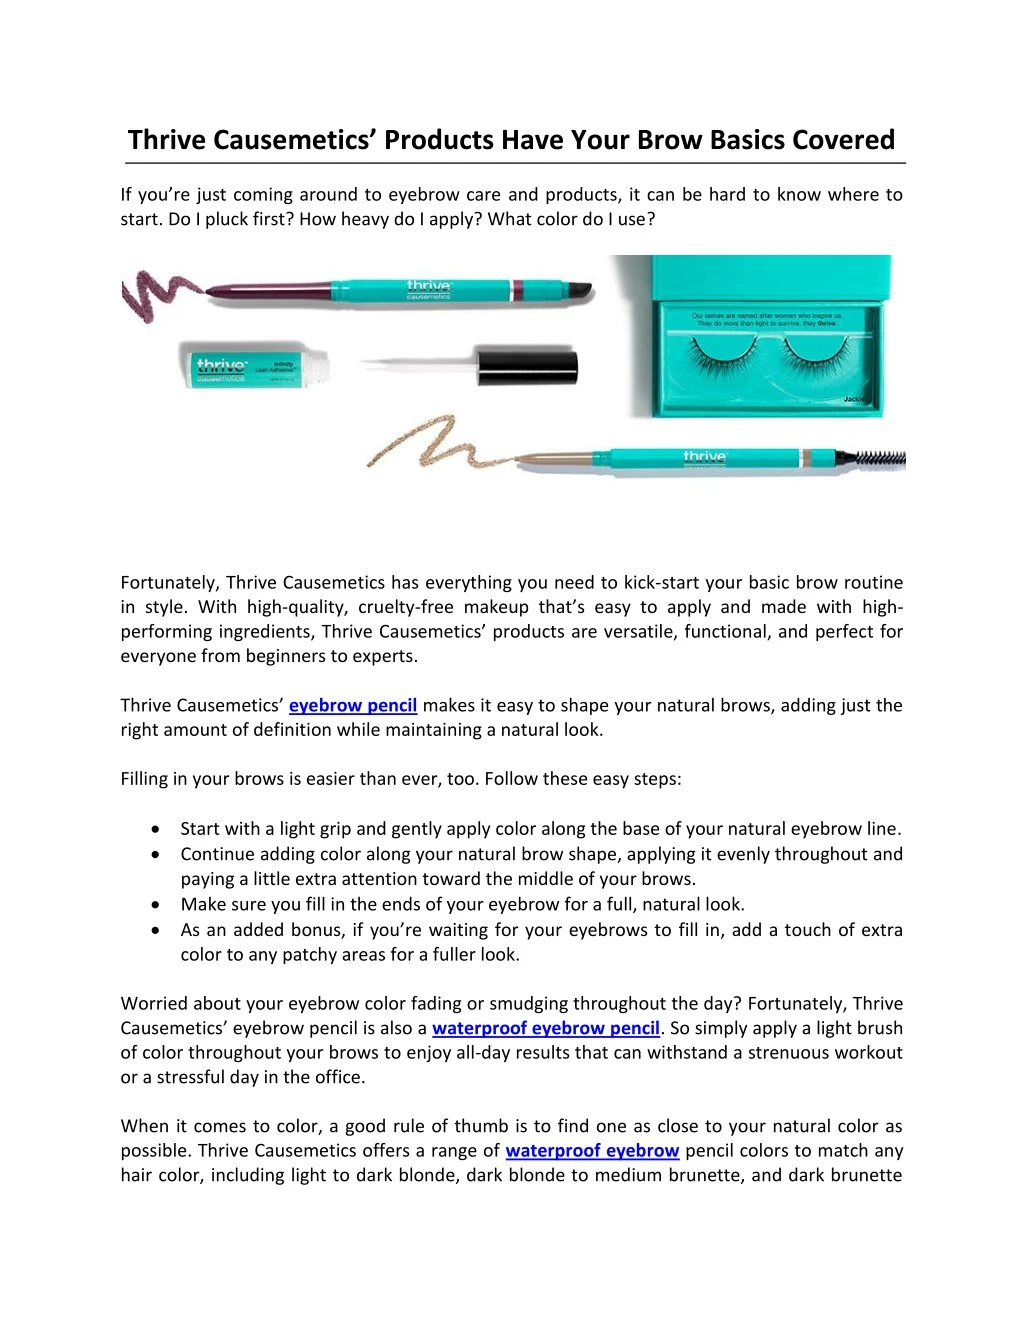 thrive causemetics products have your brow basics